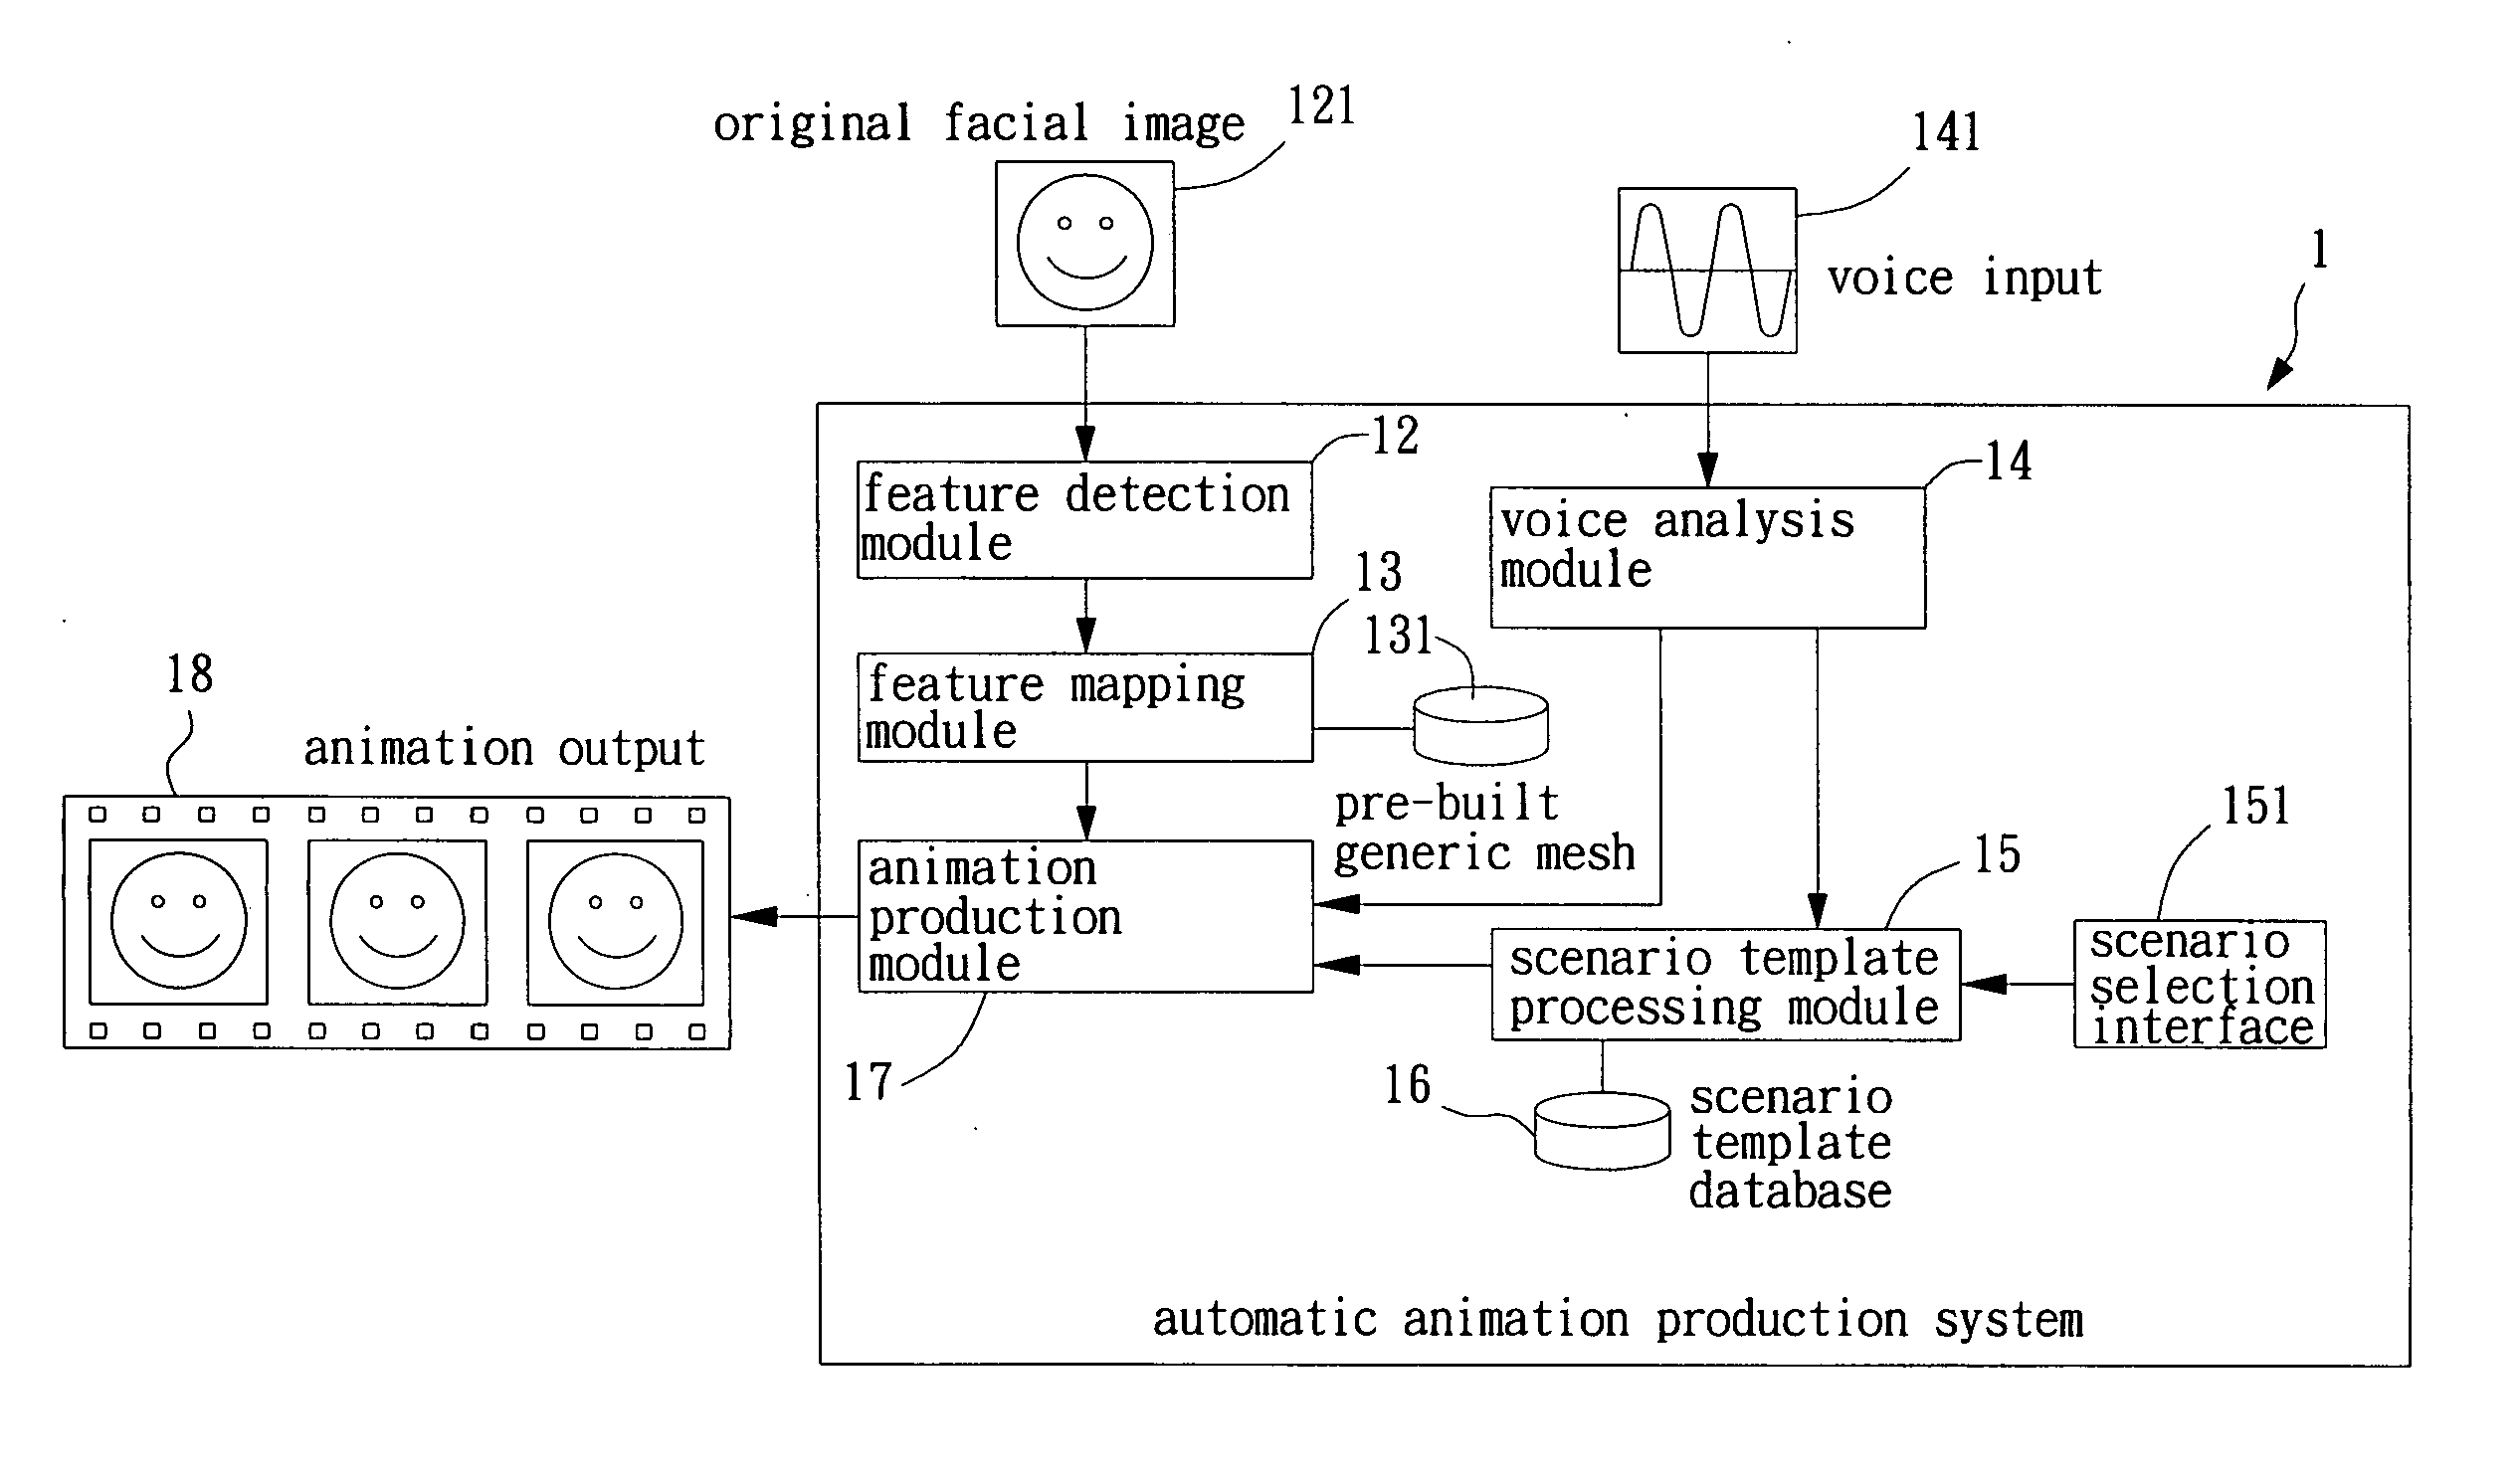 Automatic animation production system and method